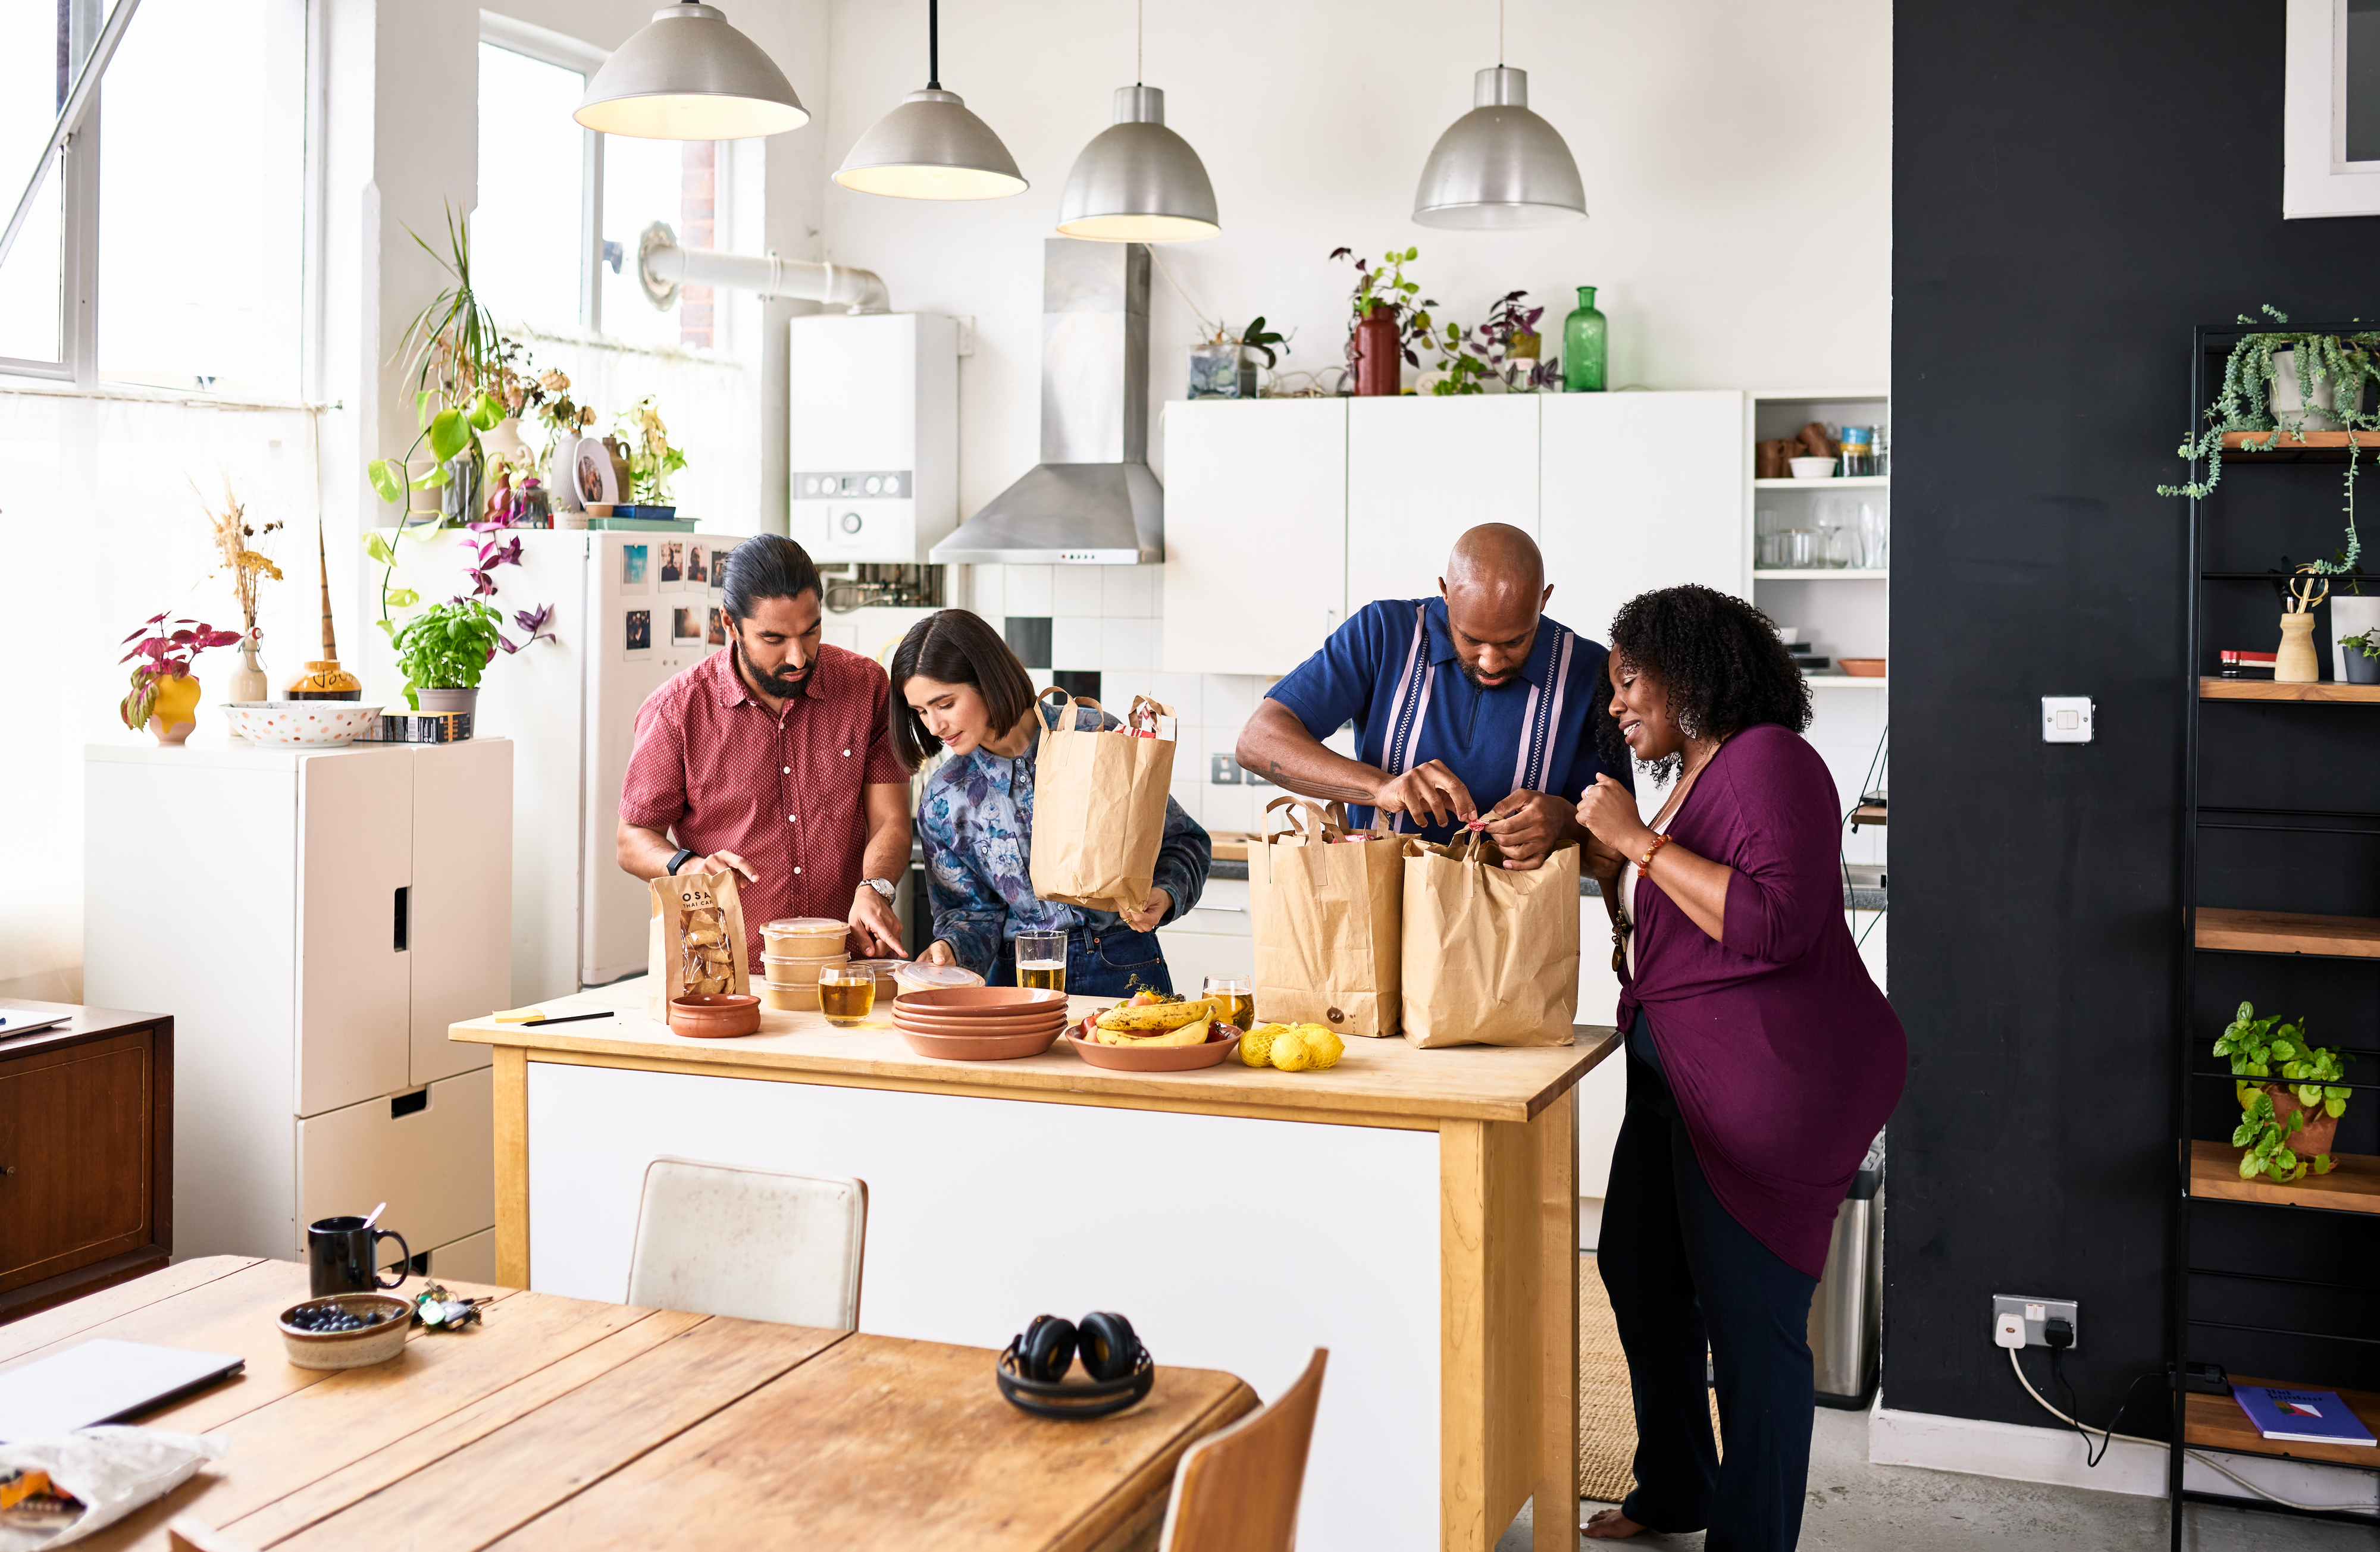 Four people unpacking groceries in a bright kitchen